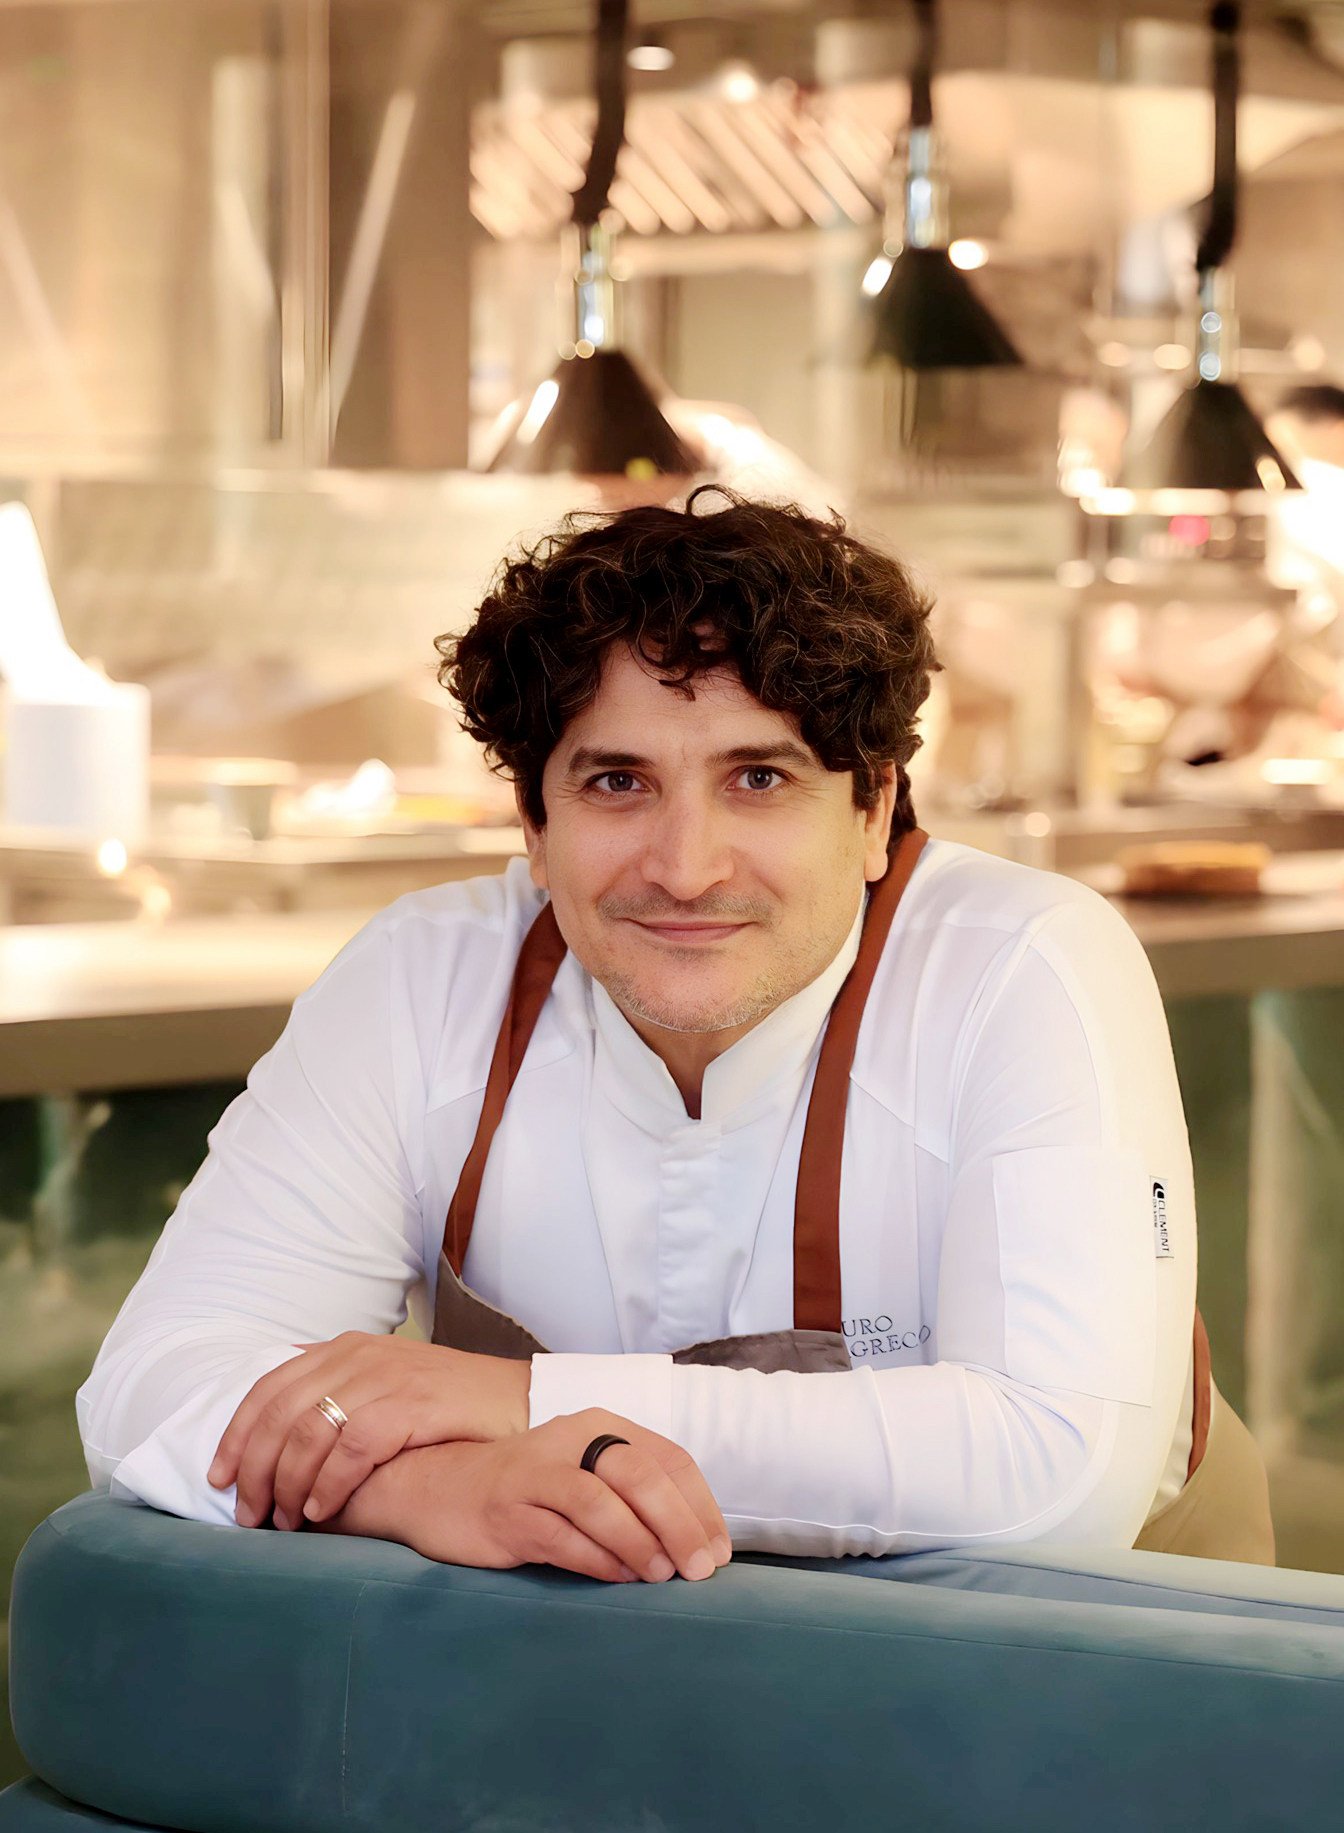 Mauro Colagreco, the chef behind Plaisance in Hong Kong, talks about why sourcing local, seasonal ingredients for his restaurants is imperative, and why being a chef is not just about “making a good dish”. Photo: Plaisance by Mauro Colagreco